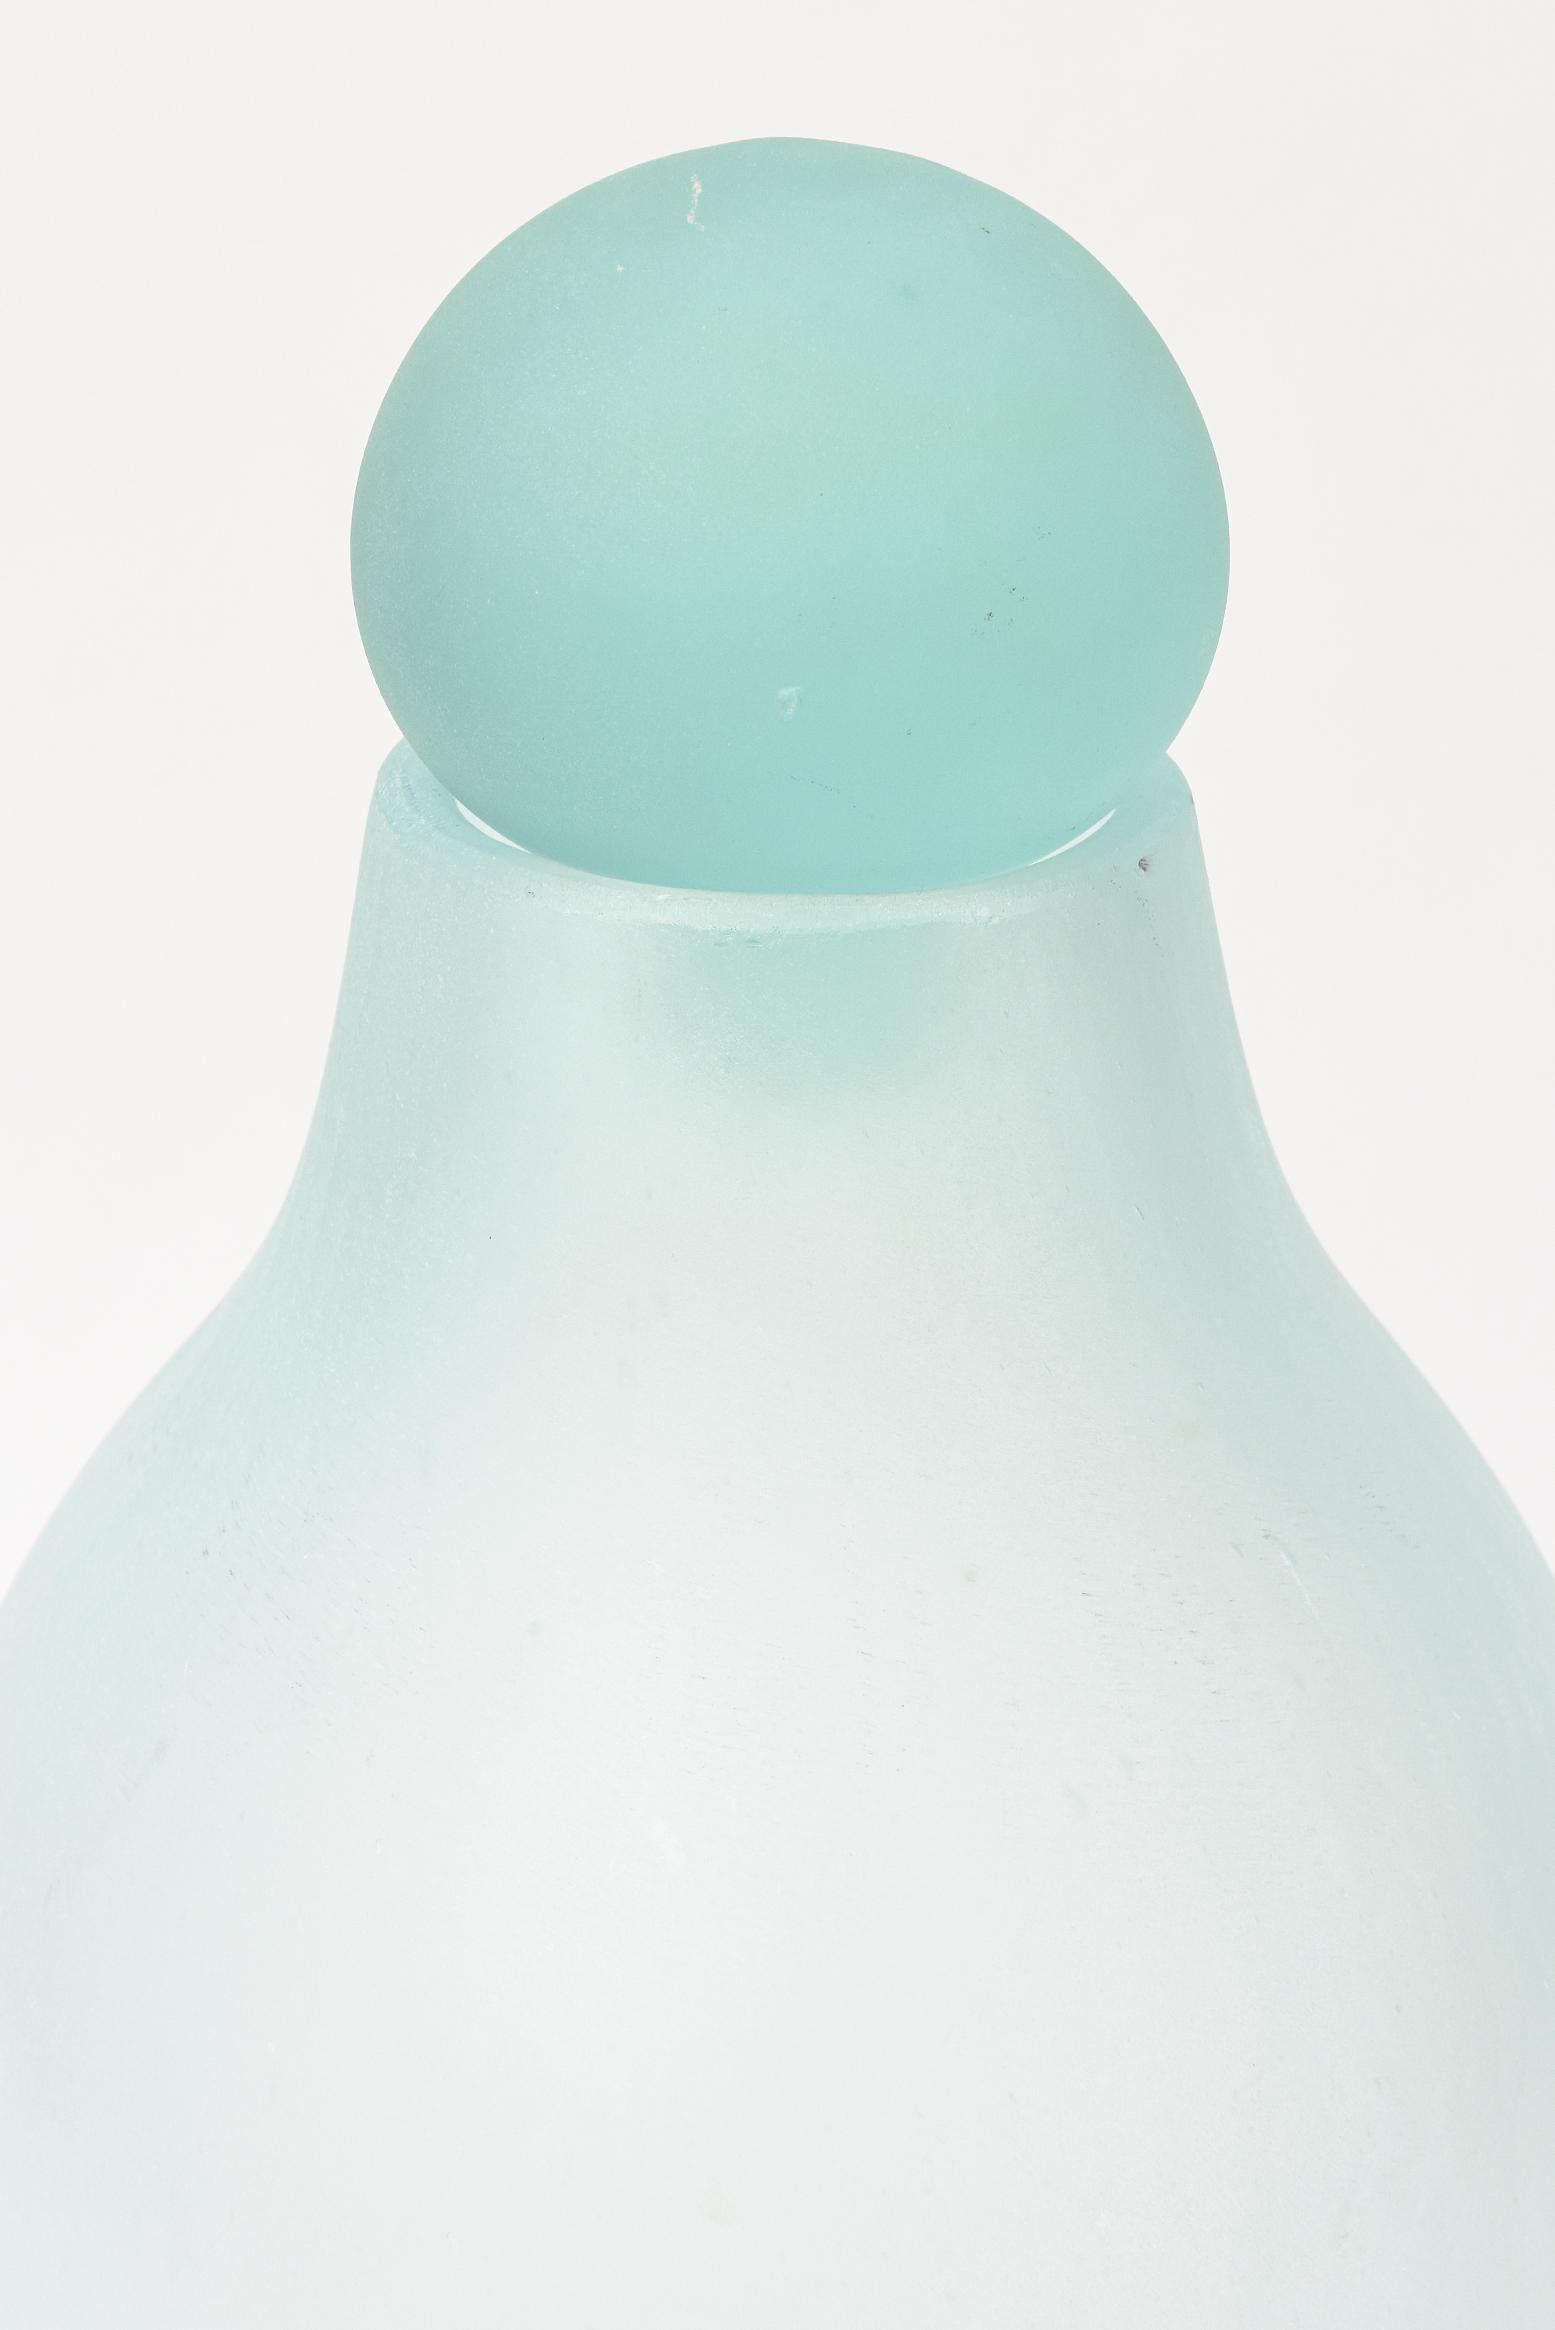 Modern Murano Scavo Turquoise Decanter Bottle with Ball Stopper Attributed Cenedese